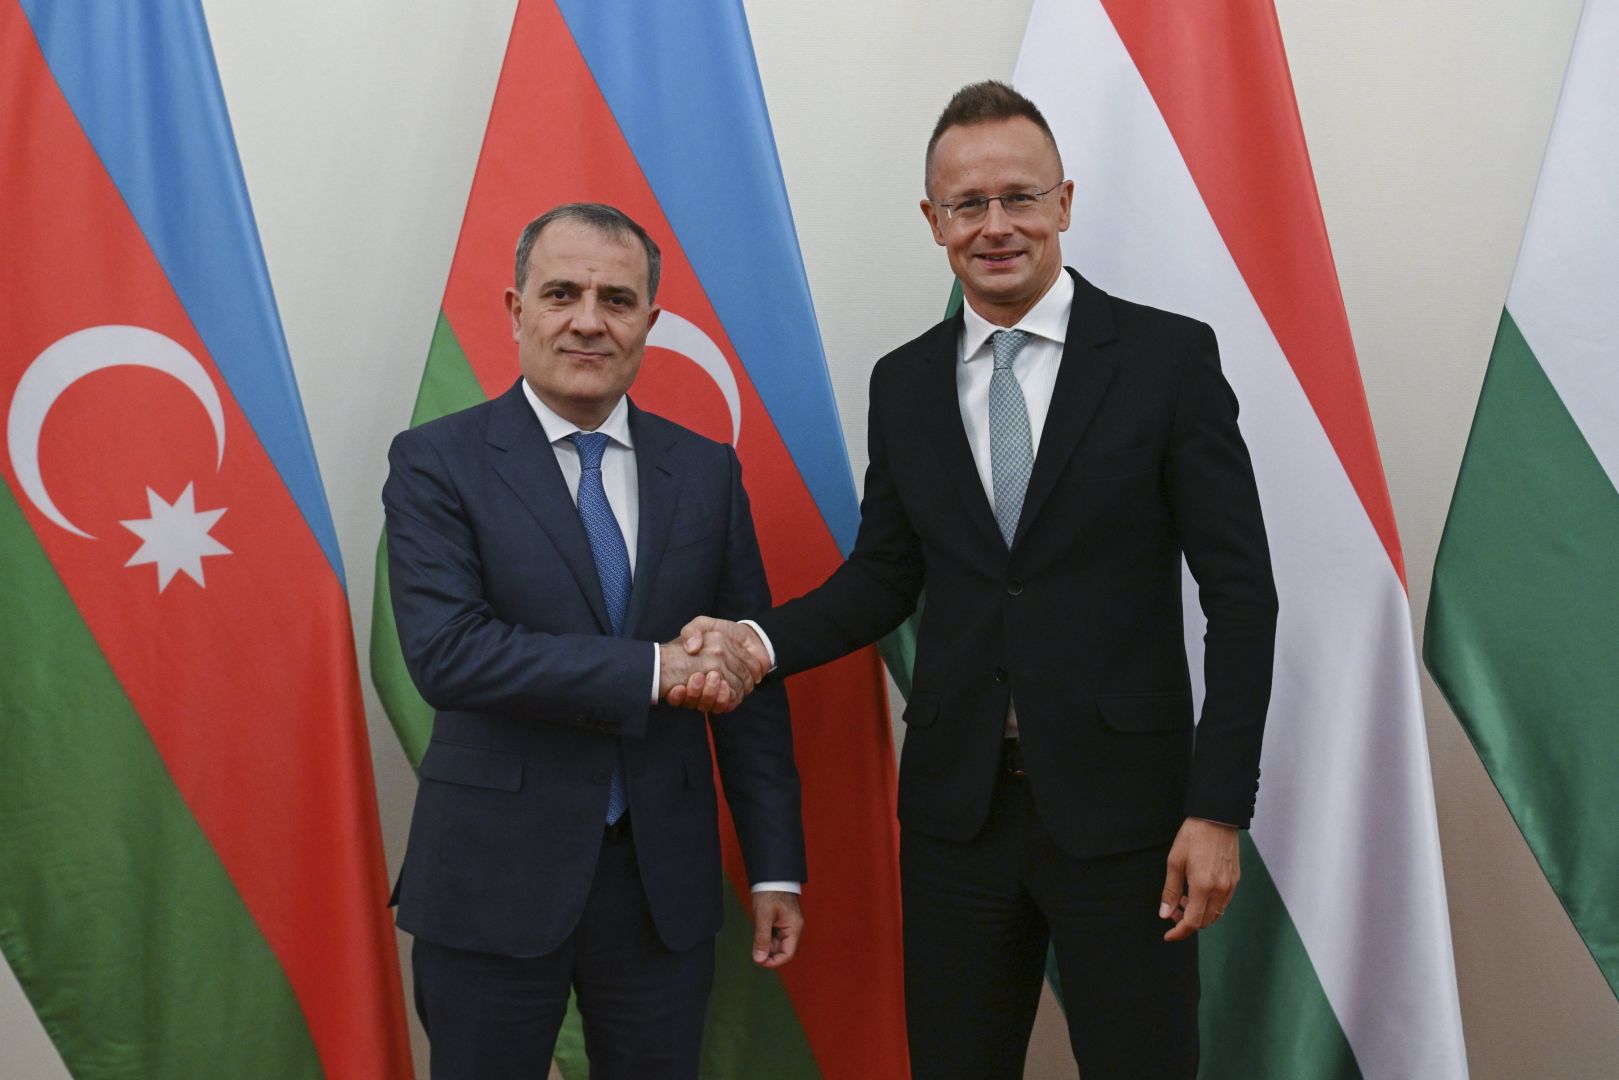 Hungary calls on EU to support expansion of gas supplies from Azerbaijan